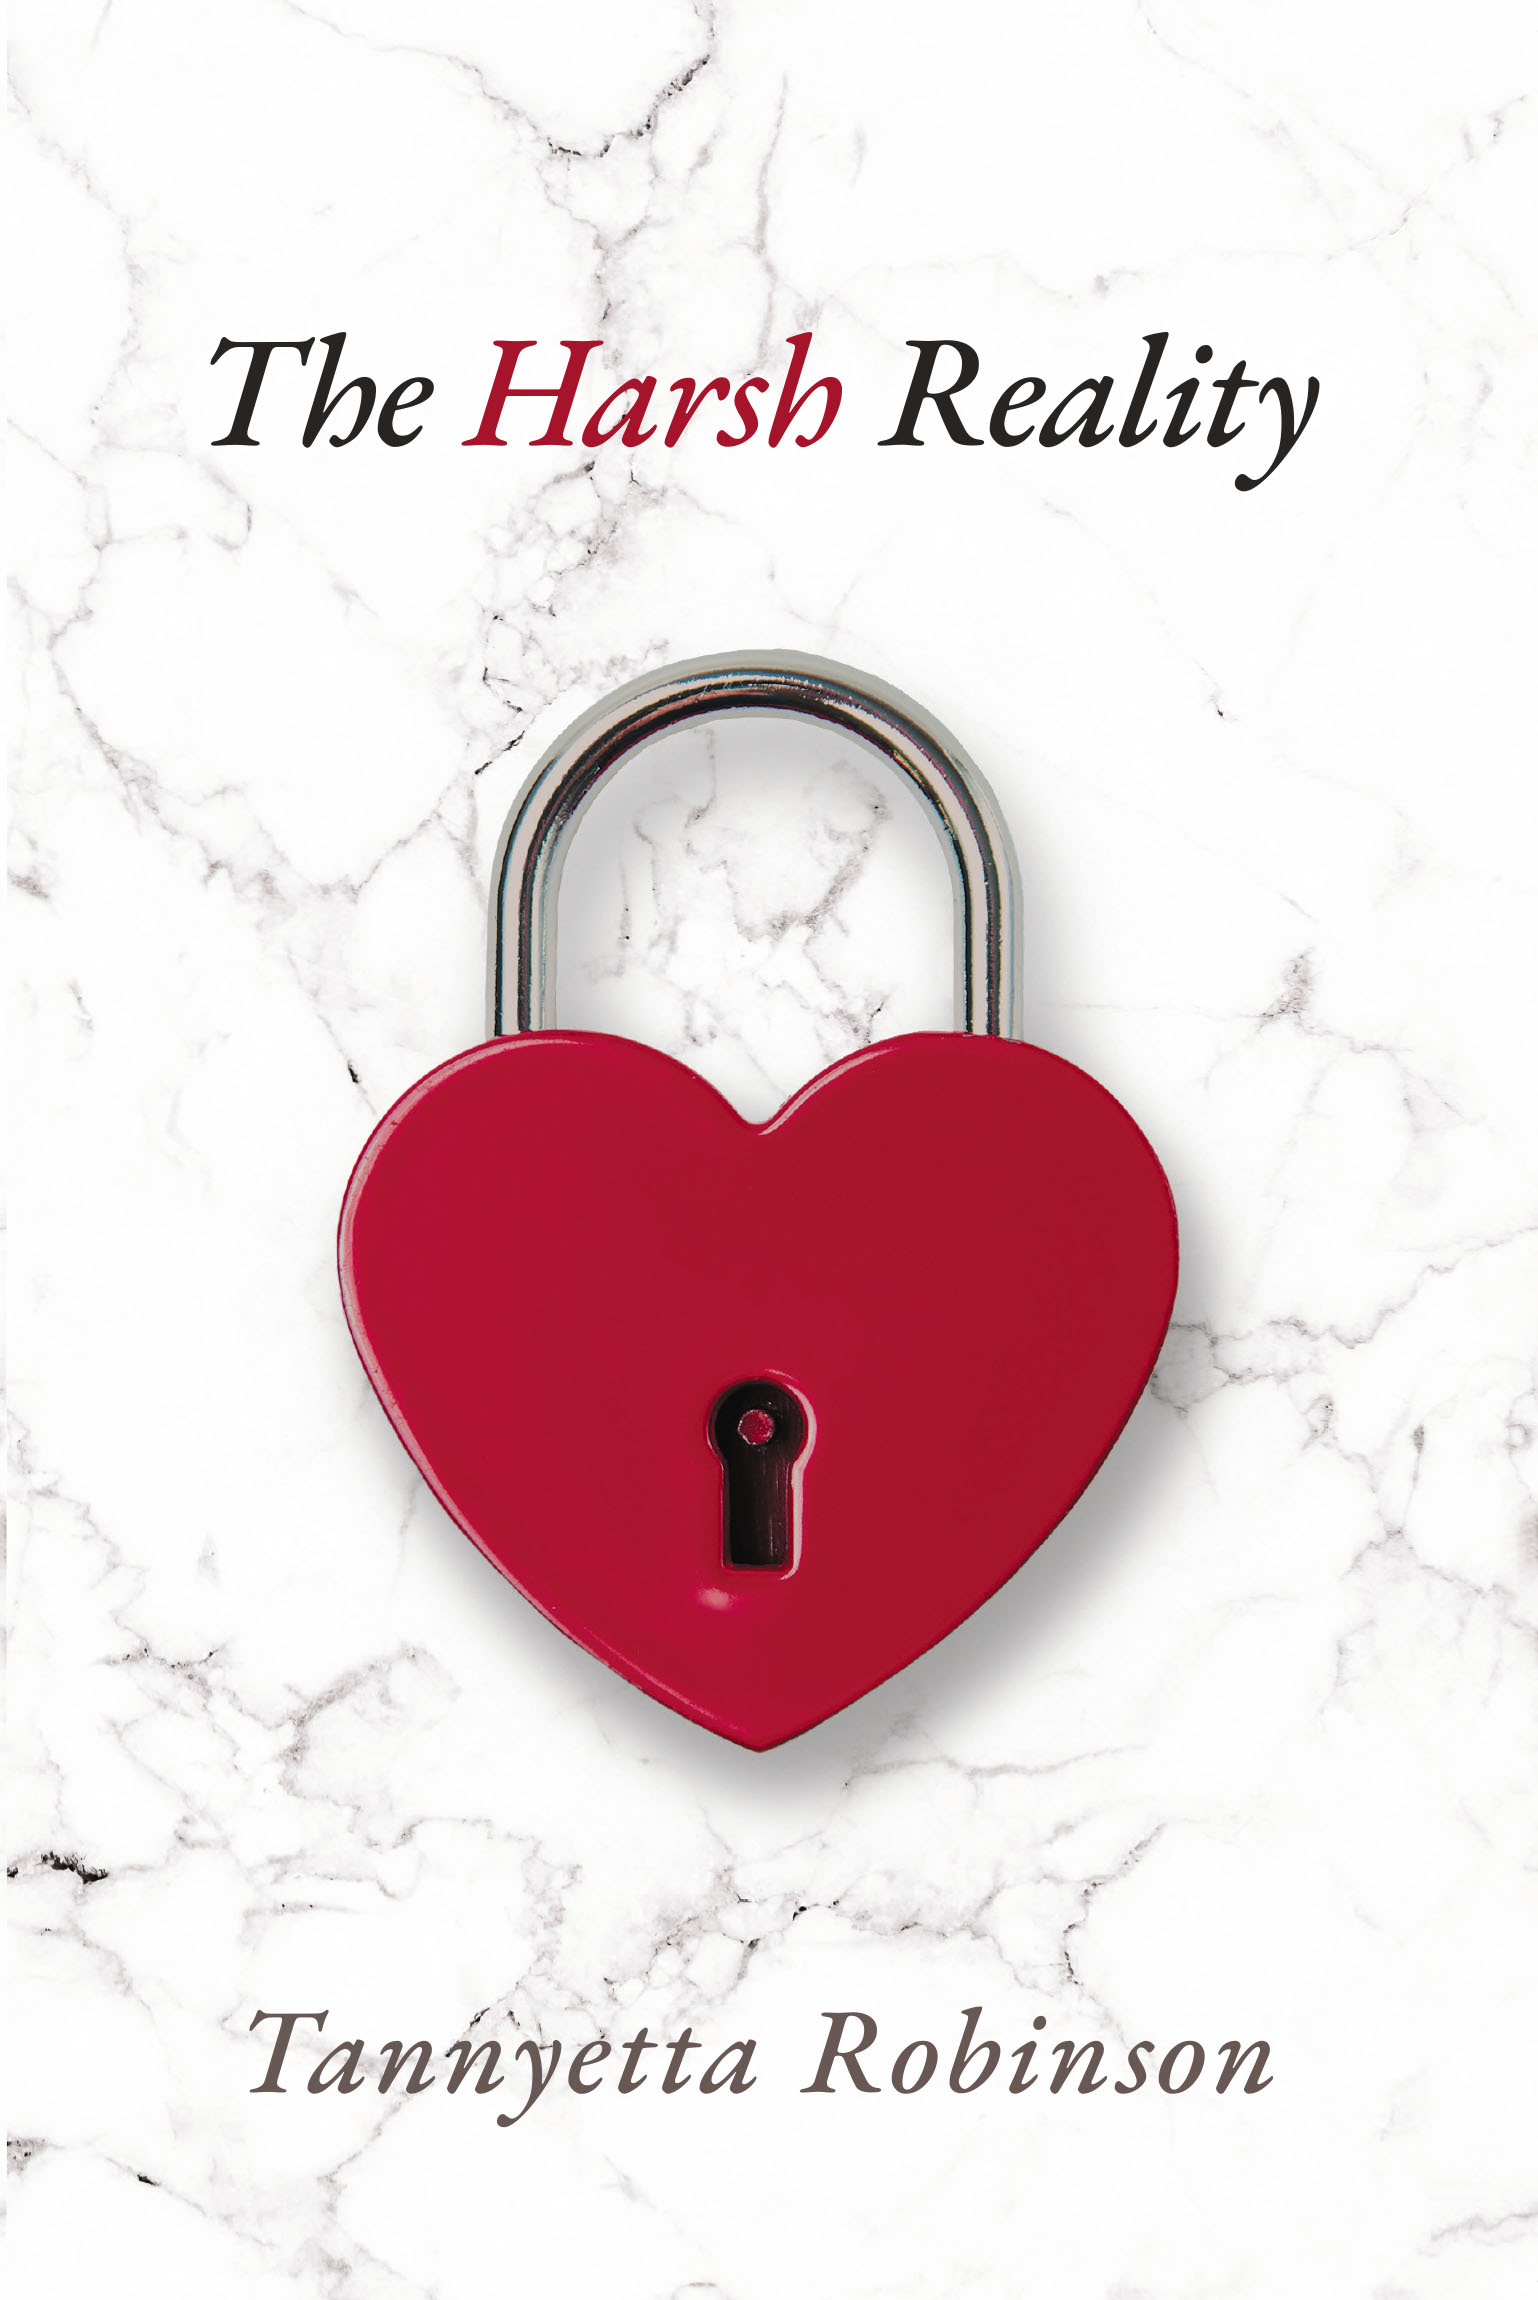 Author Tannyetta Robinson’s New Book, "The Harsh Reality," Follows Two Best Friends Who Must Try to Find Justice After the Untimely Murder of One of Their Friends